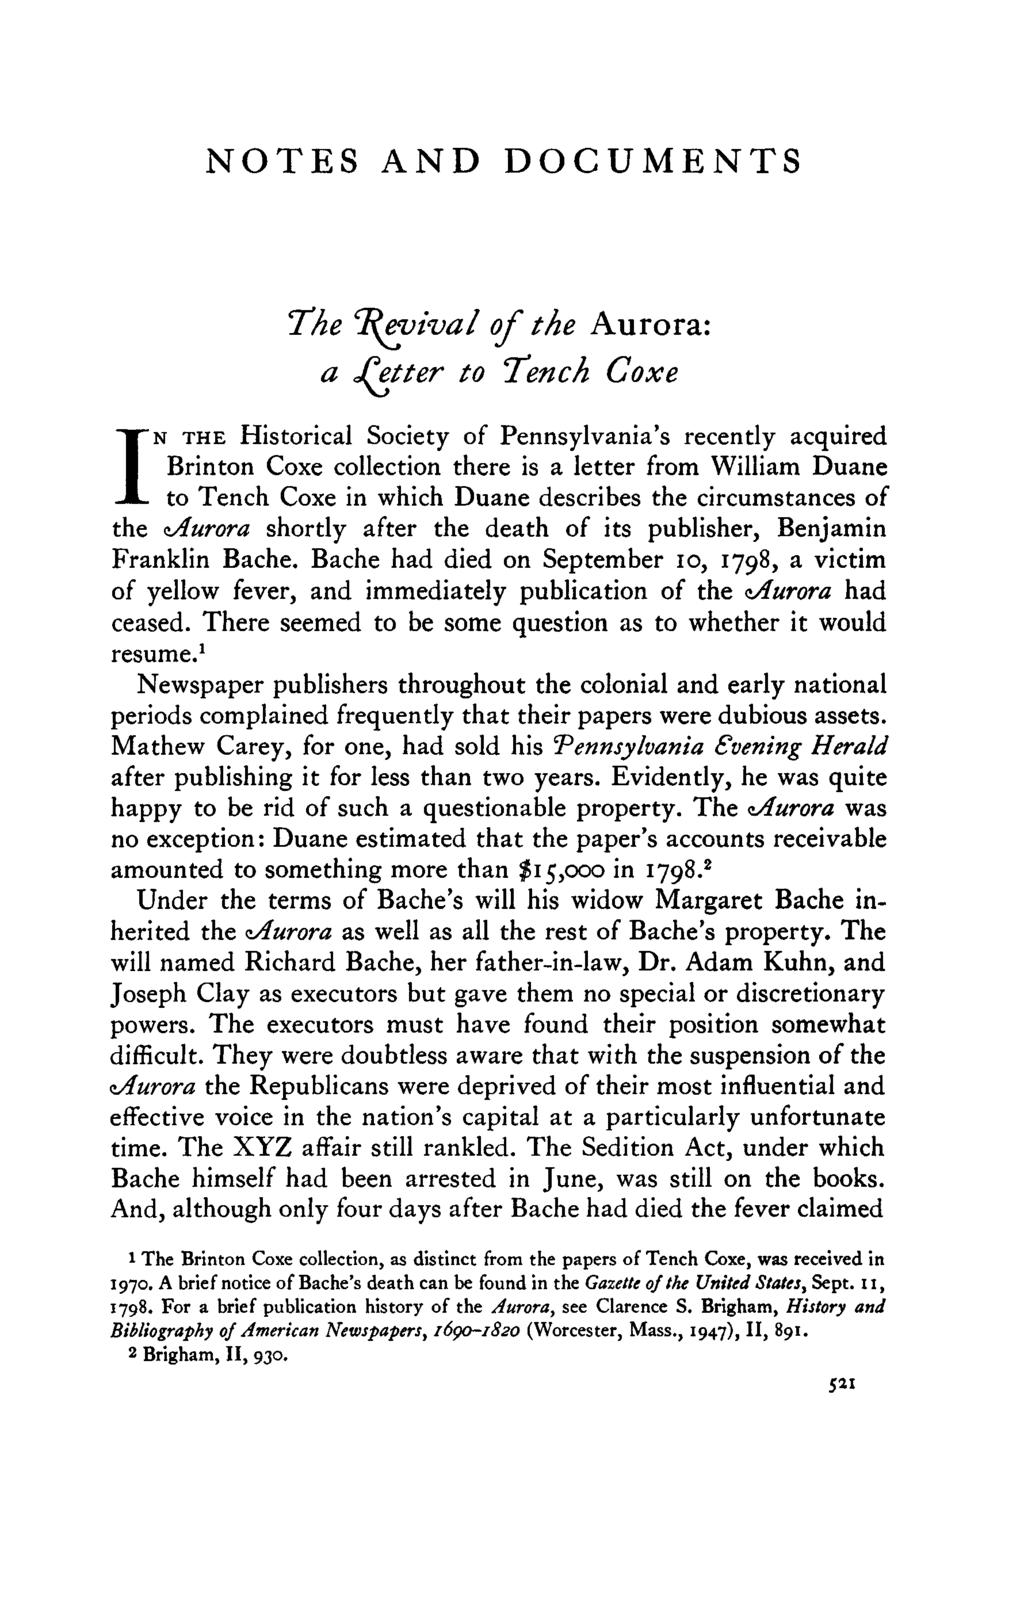 NOTES AND DOCUMENTS The T^evival of the Aurora: a fetter to Tench Coxe I N THE Historical Society of Pennsylvania's recently acquired Brinton Coxe collection there is a letter from William Duane to